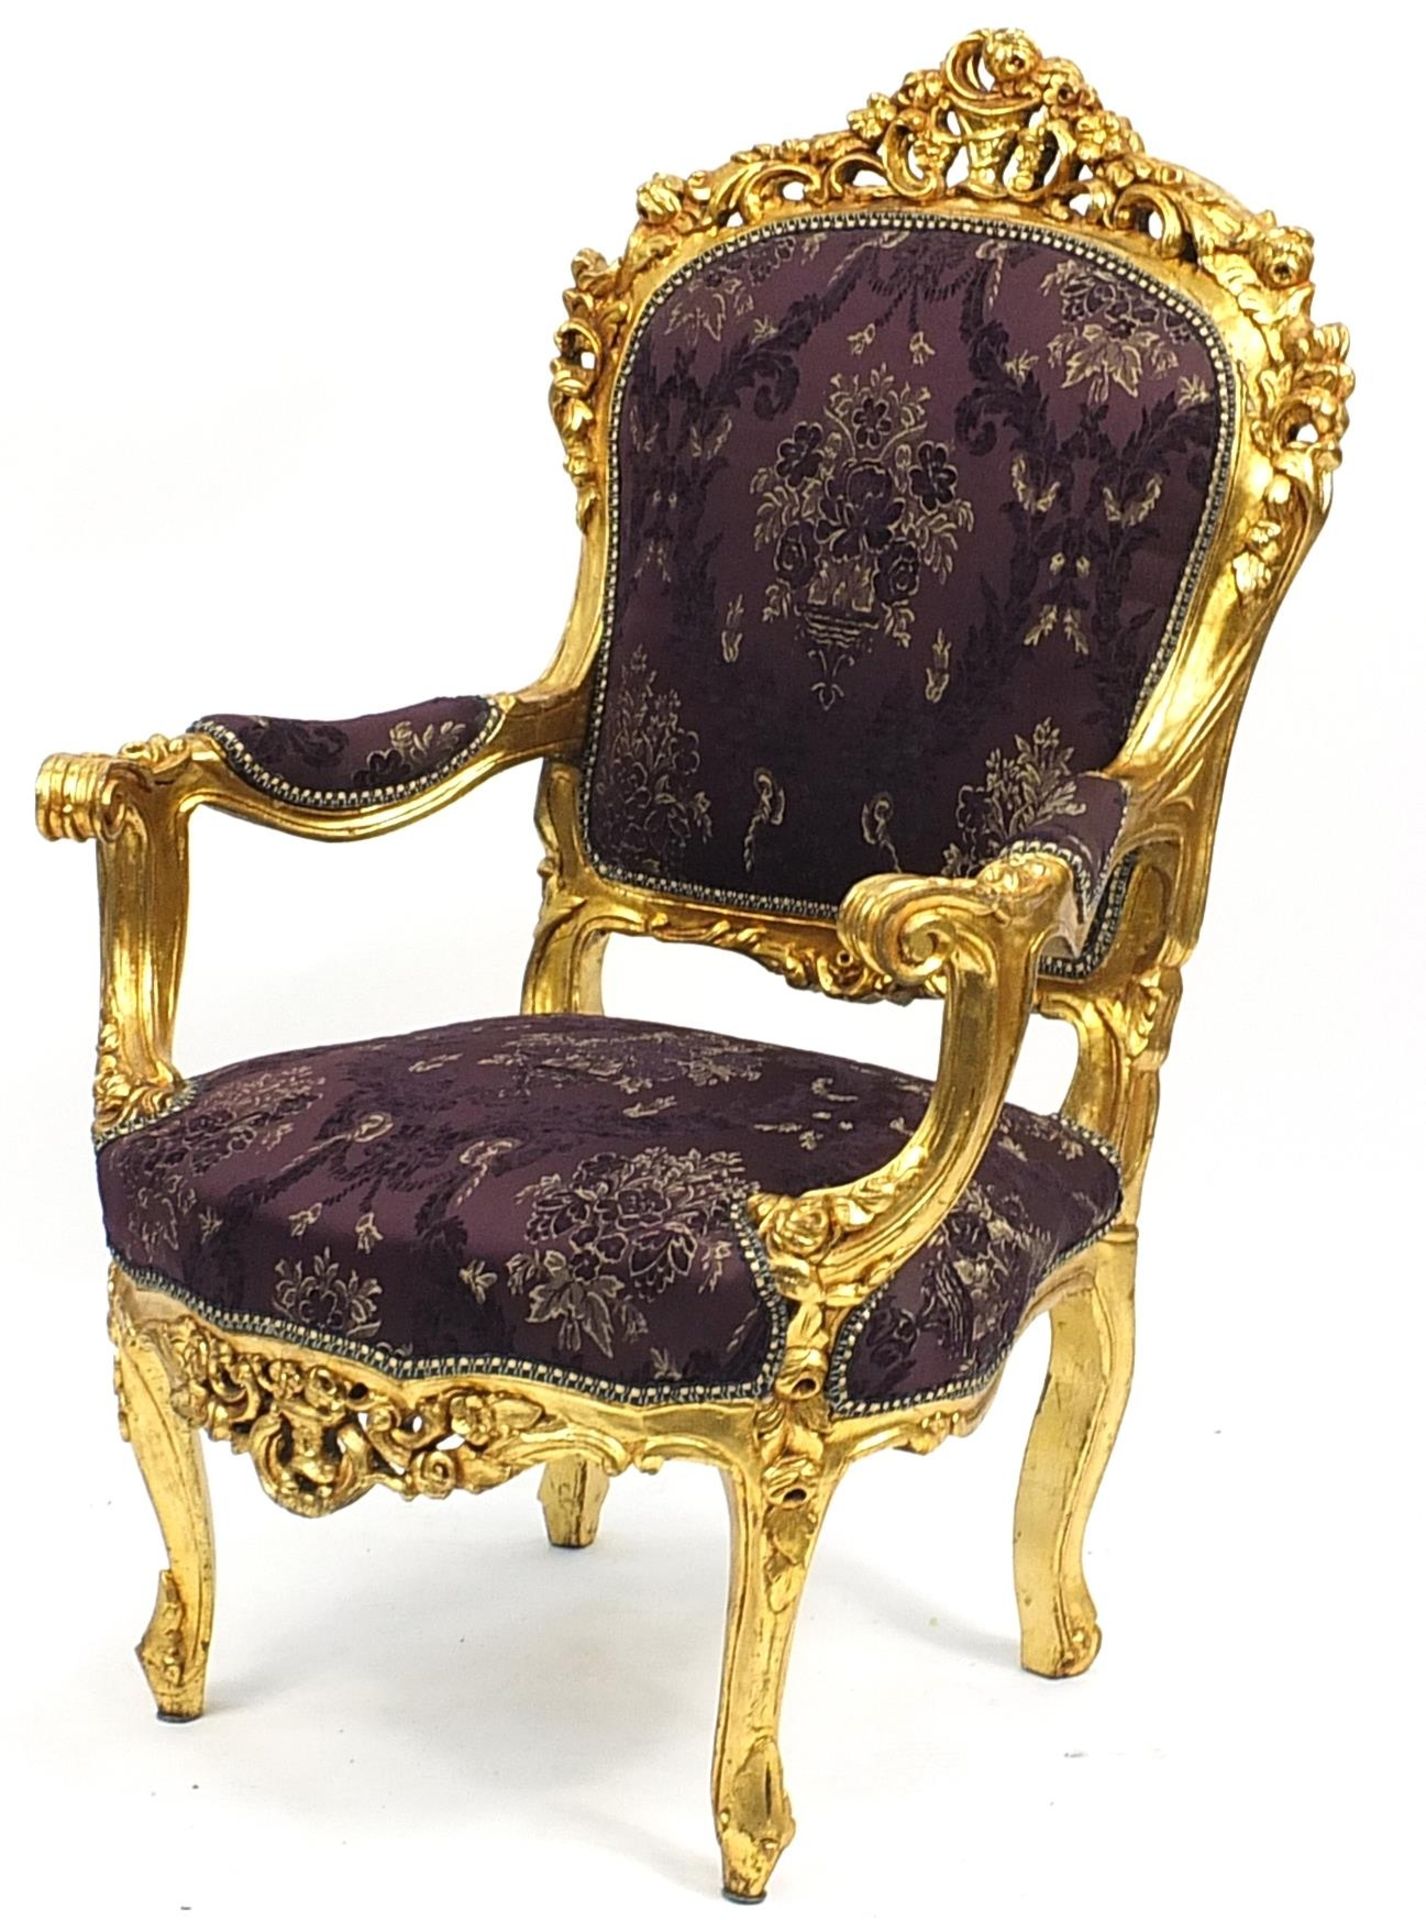 Ornate French style giltwood open armchair with purple floral upholstery, 112cm high